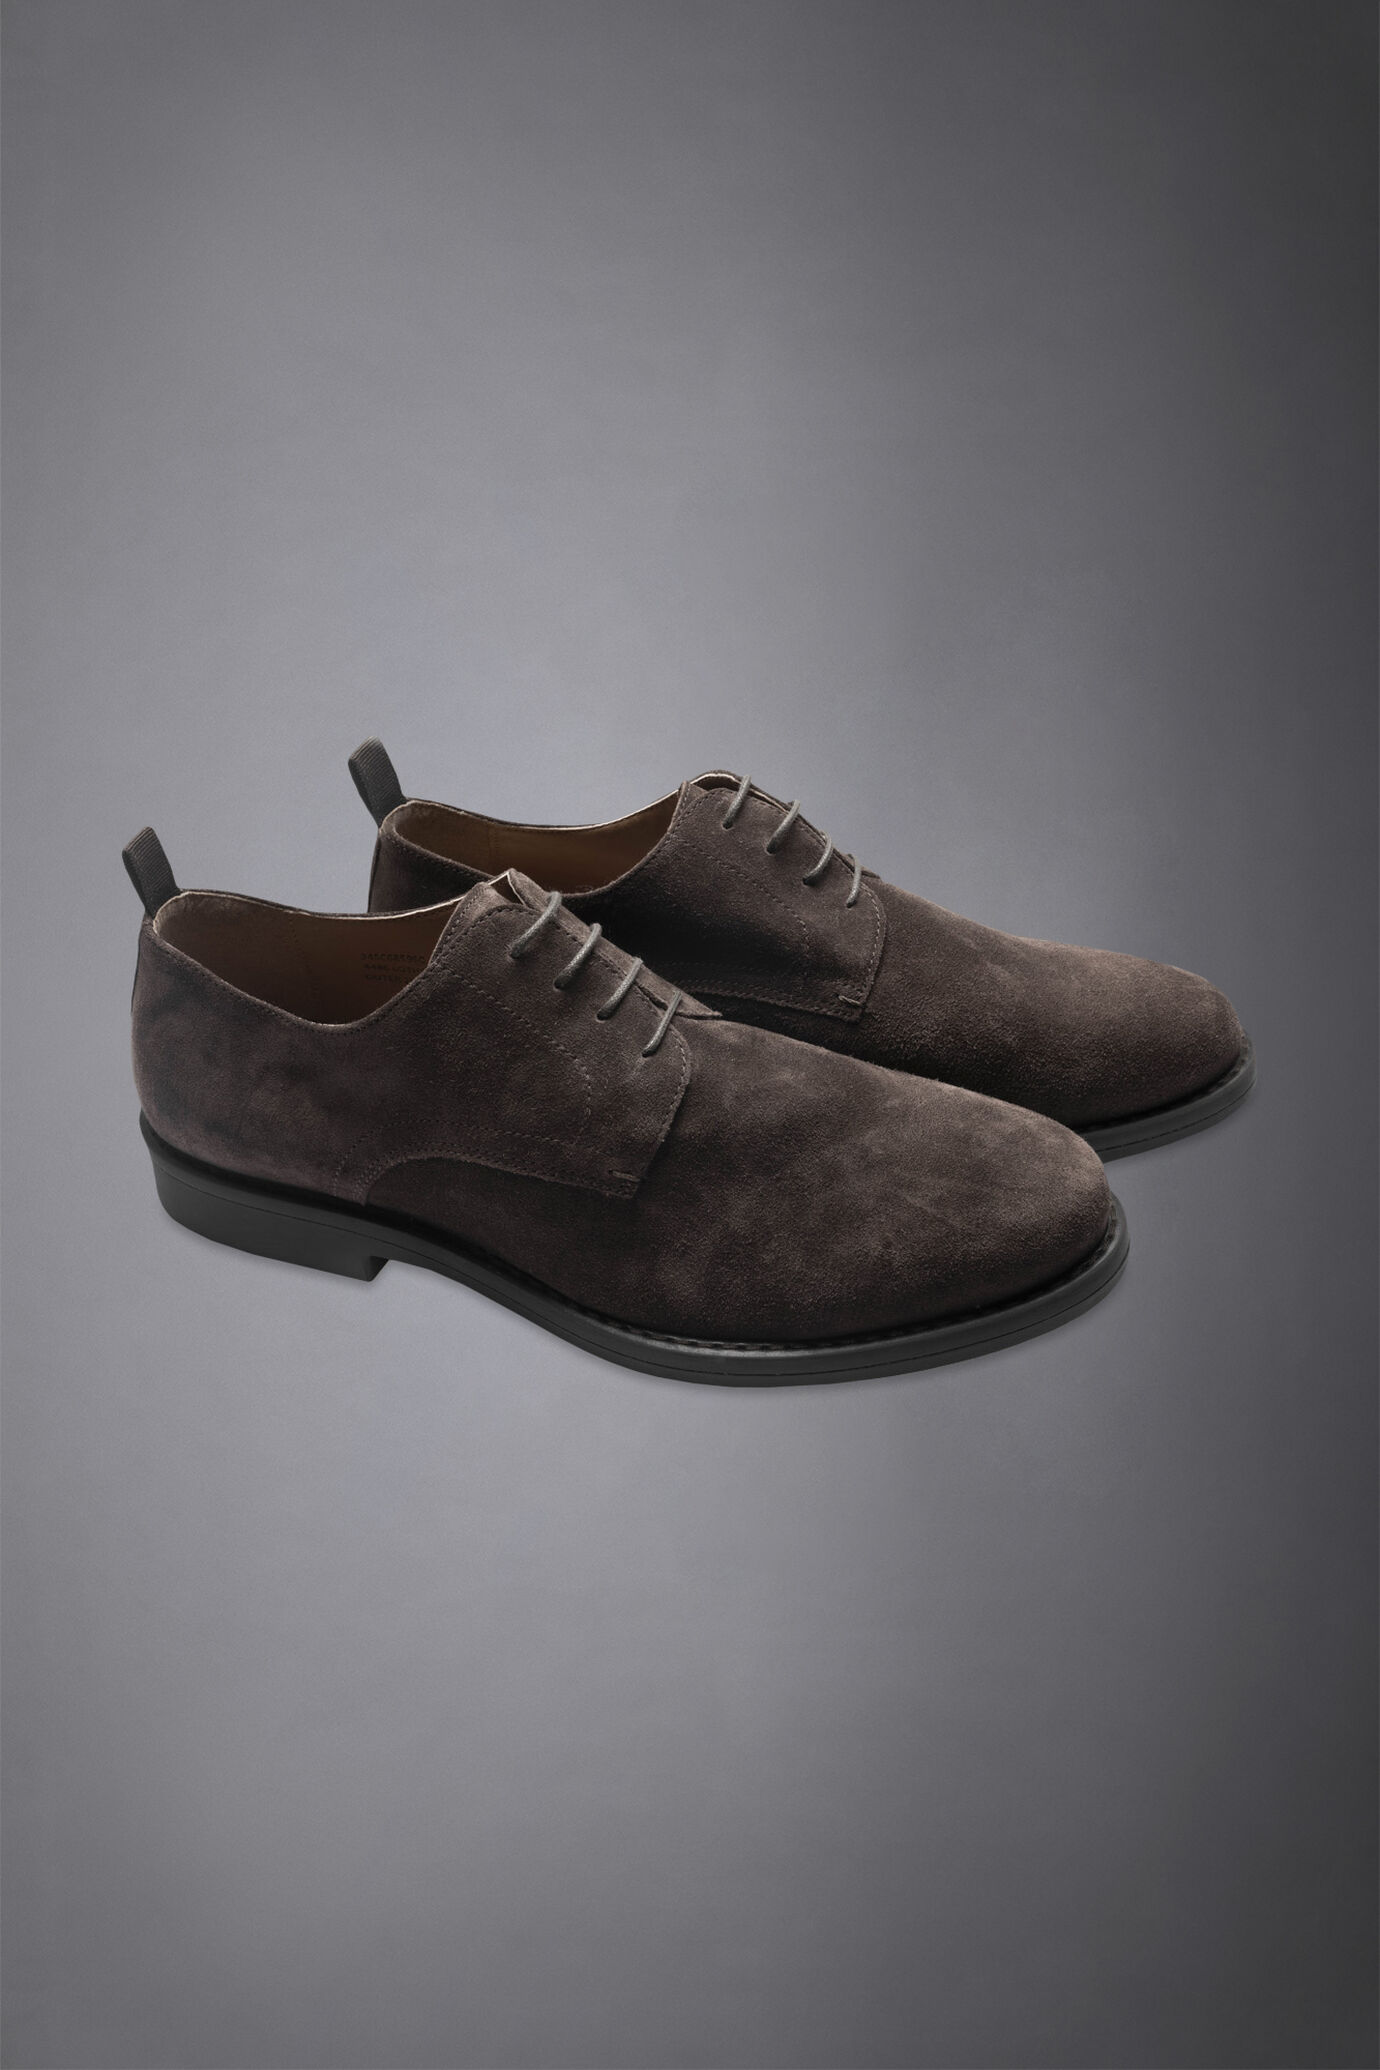 Men's 100% suede leather derby shoe with rubber sole